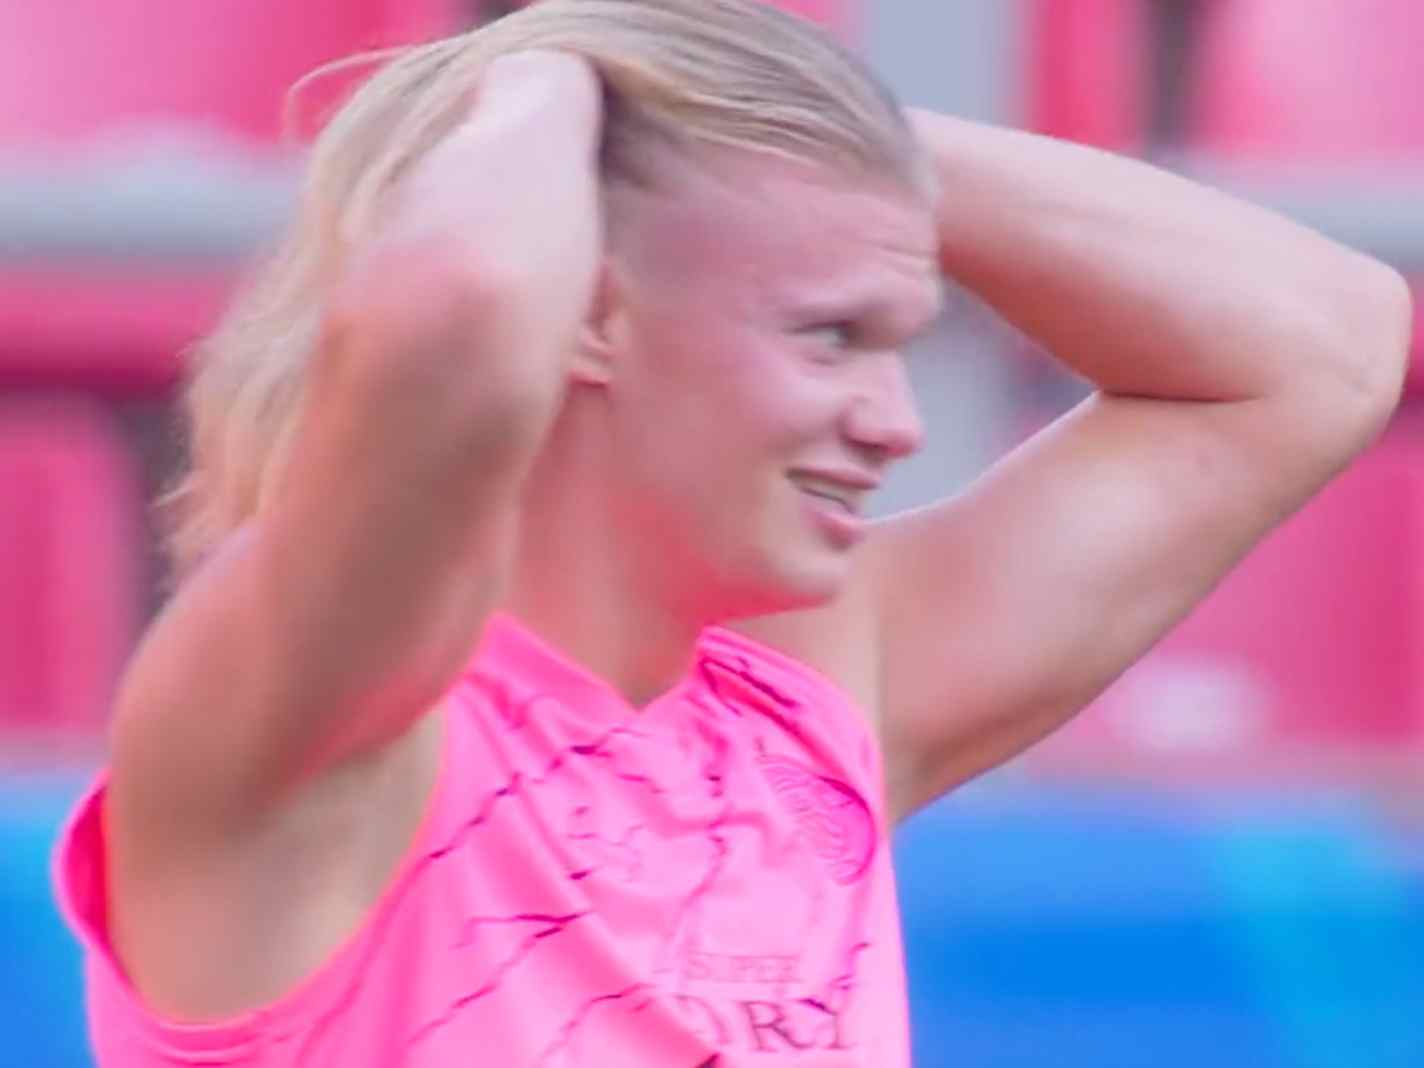 Look: Erling Haaland Goes Full Barbie with Luscious Locks and Pink Top